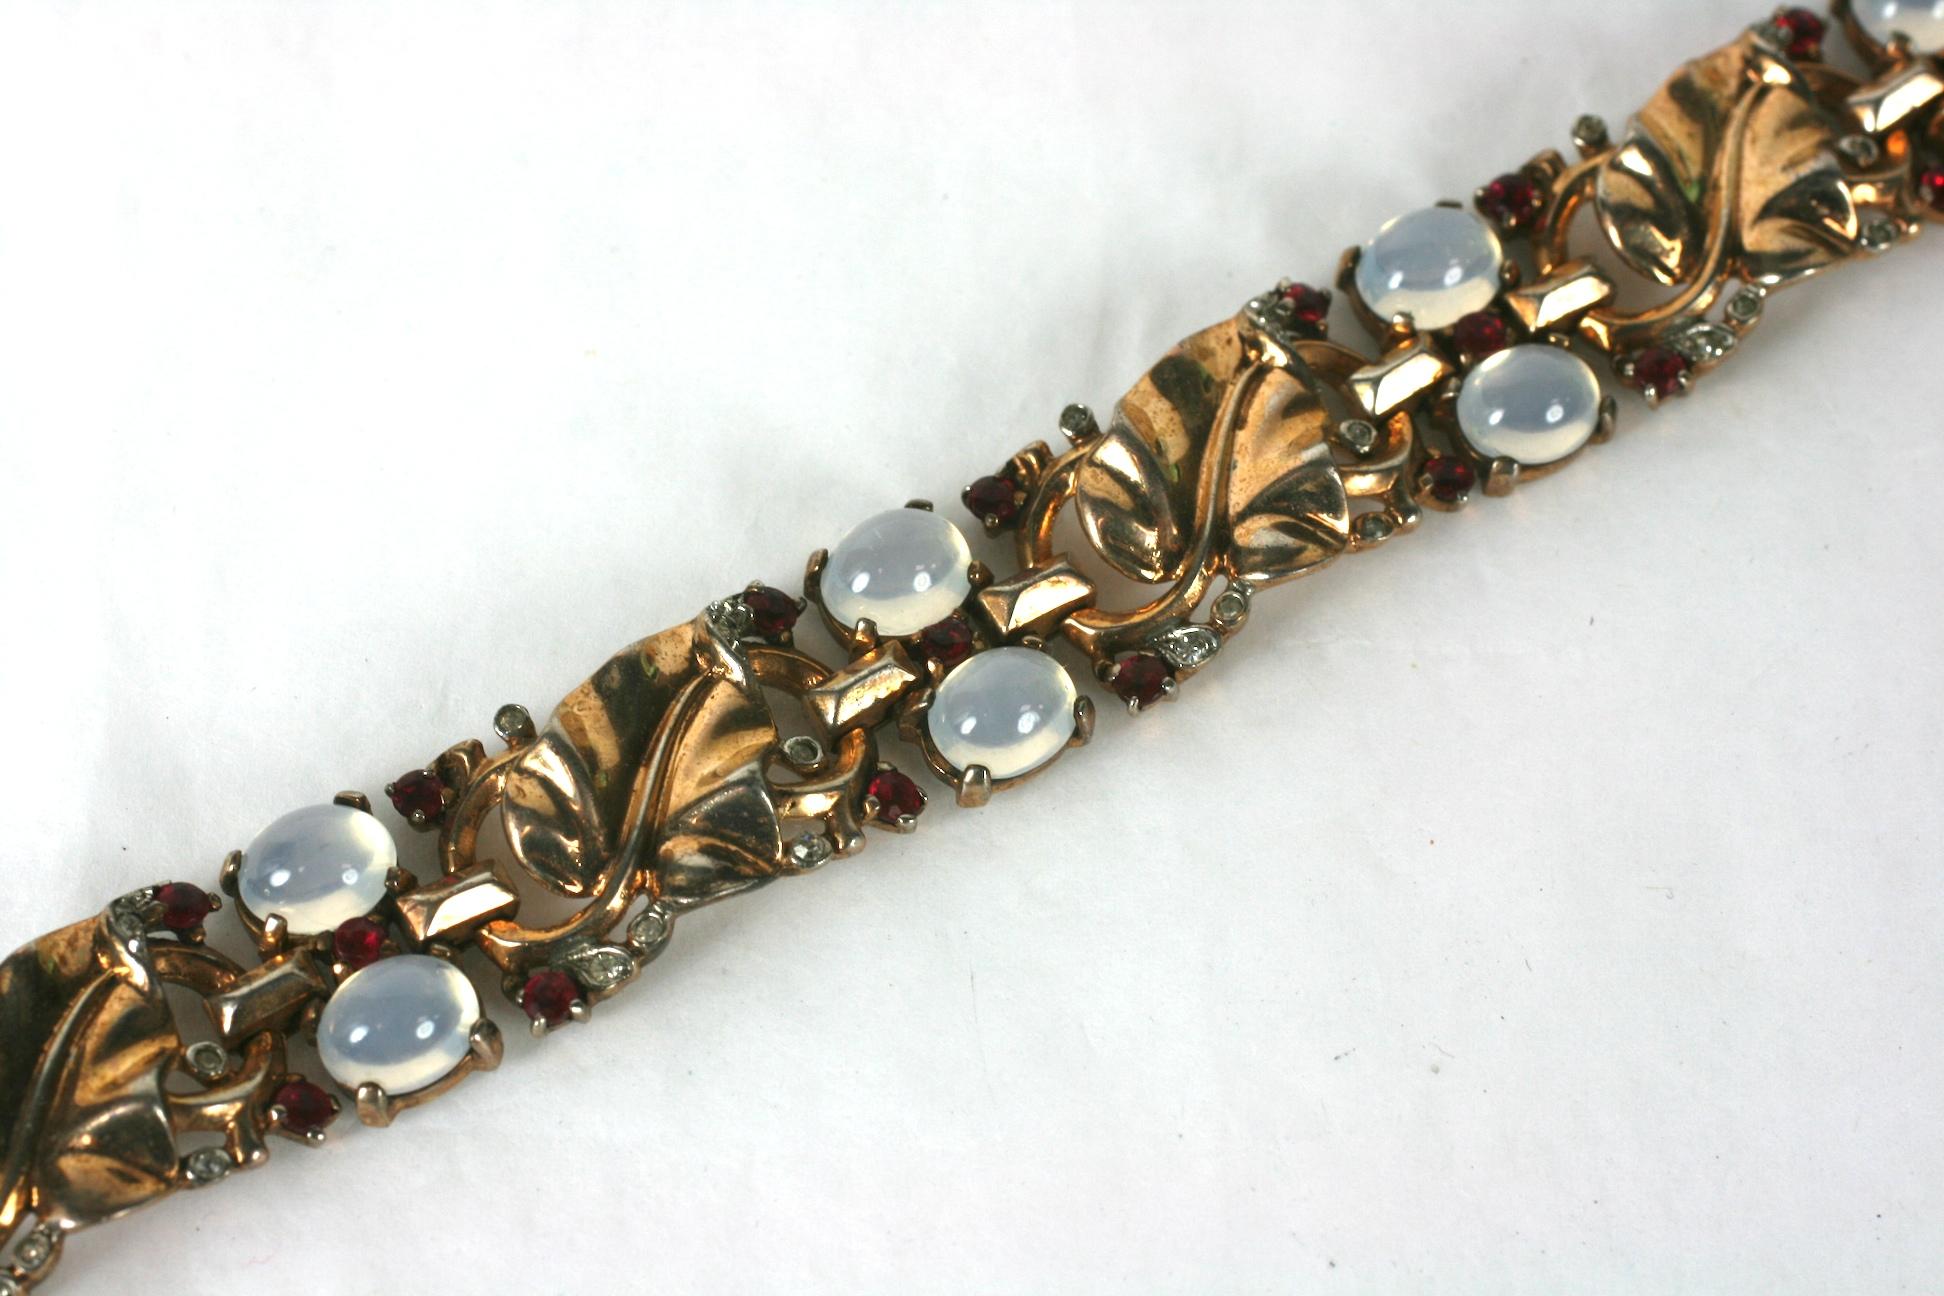 Trifari,  Alfred Philippe Retro sterling vermeil golden leaf link bracelet of faux moonstone cabochons and ruby crystals. Each leaf panel is further accented in minute crystal pave rhinestones.
Marked: Trifari with Crown
Des Pat No 140780,